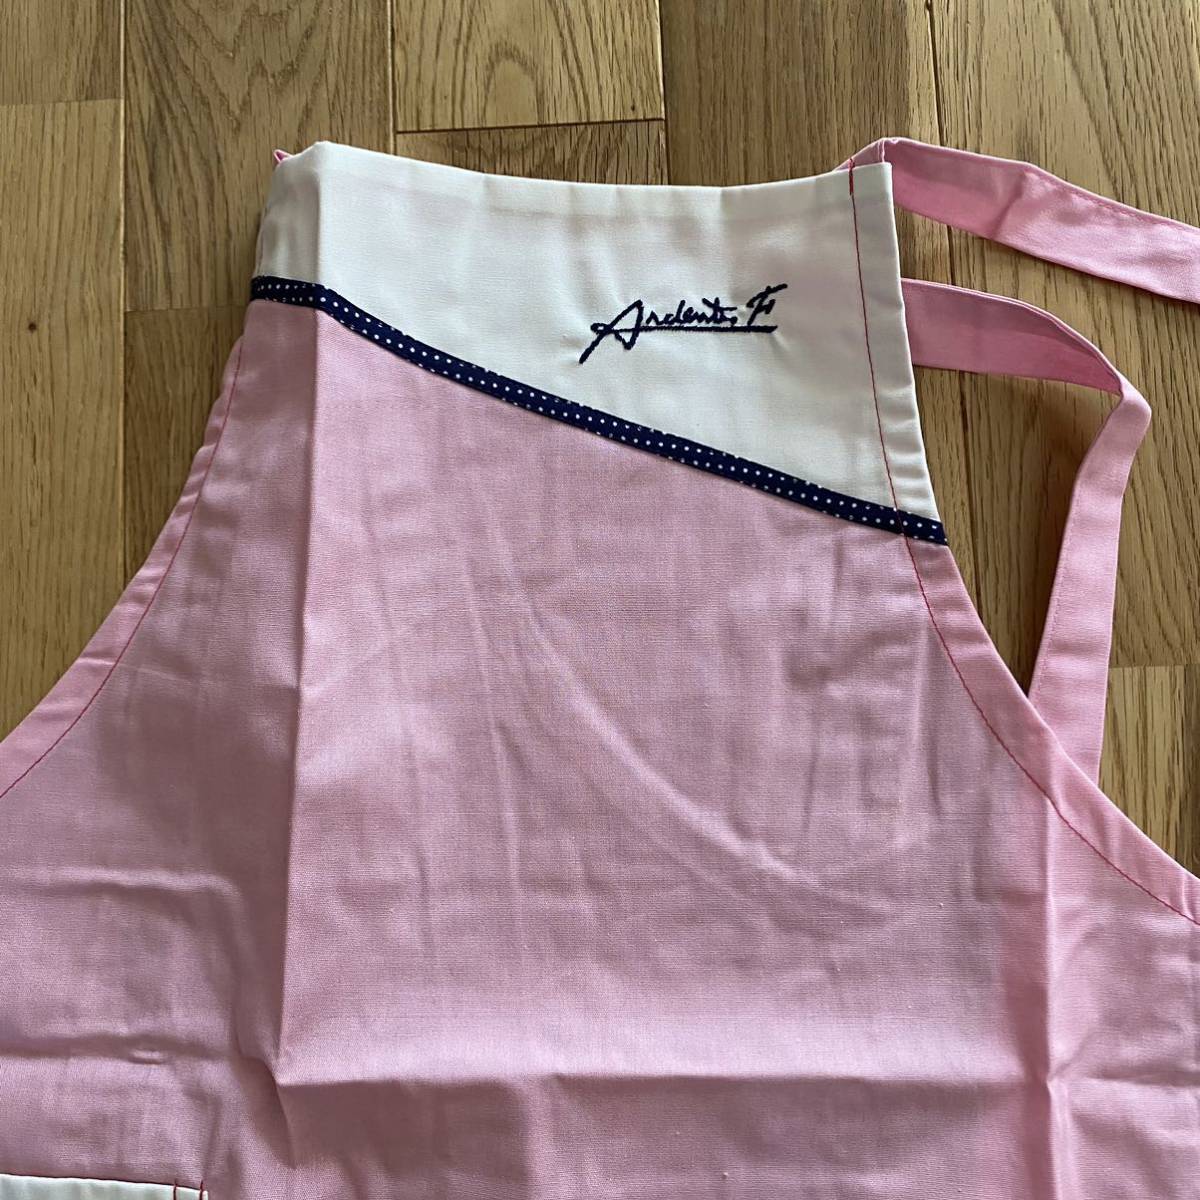  apron Showa Retro red pink series unused made in Japan 